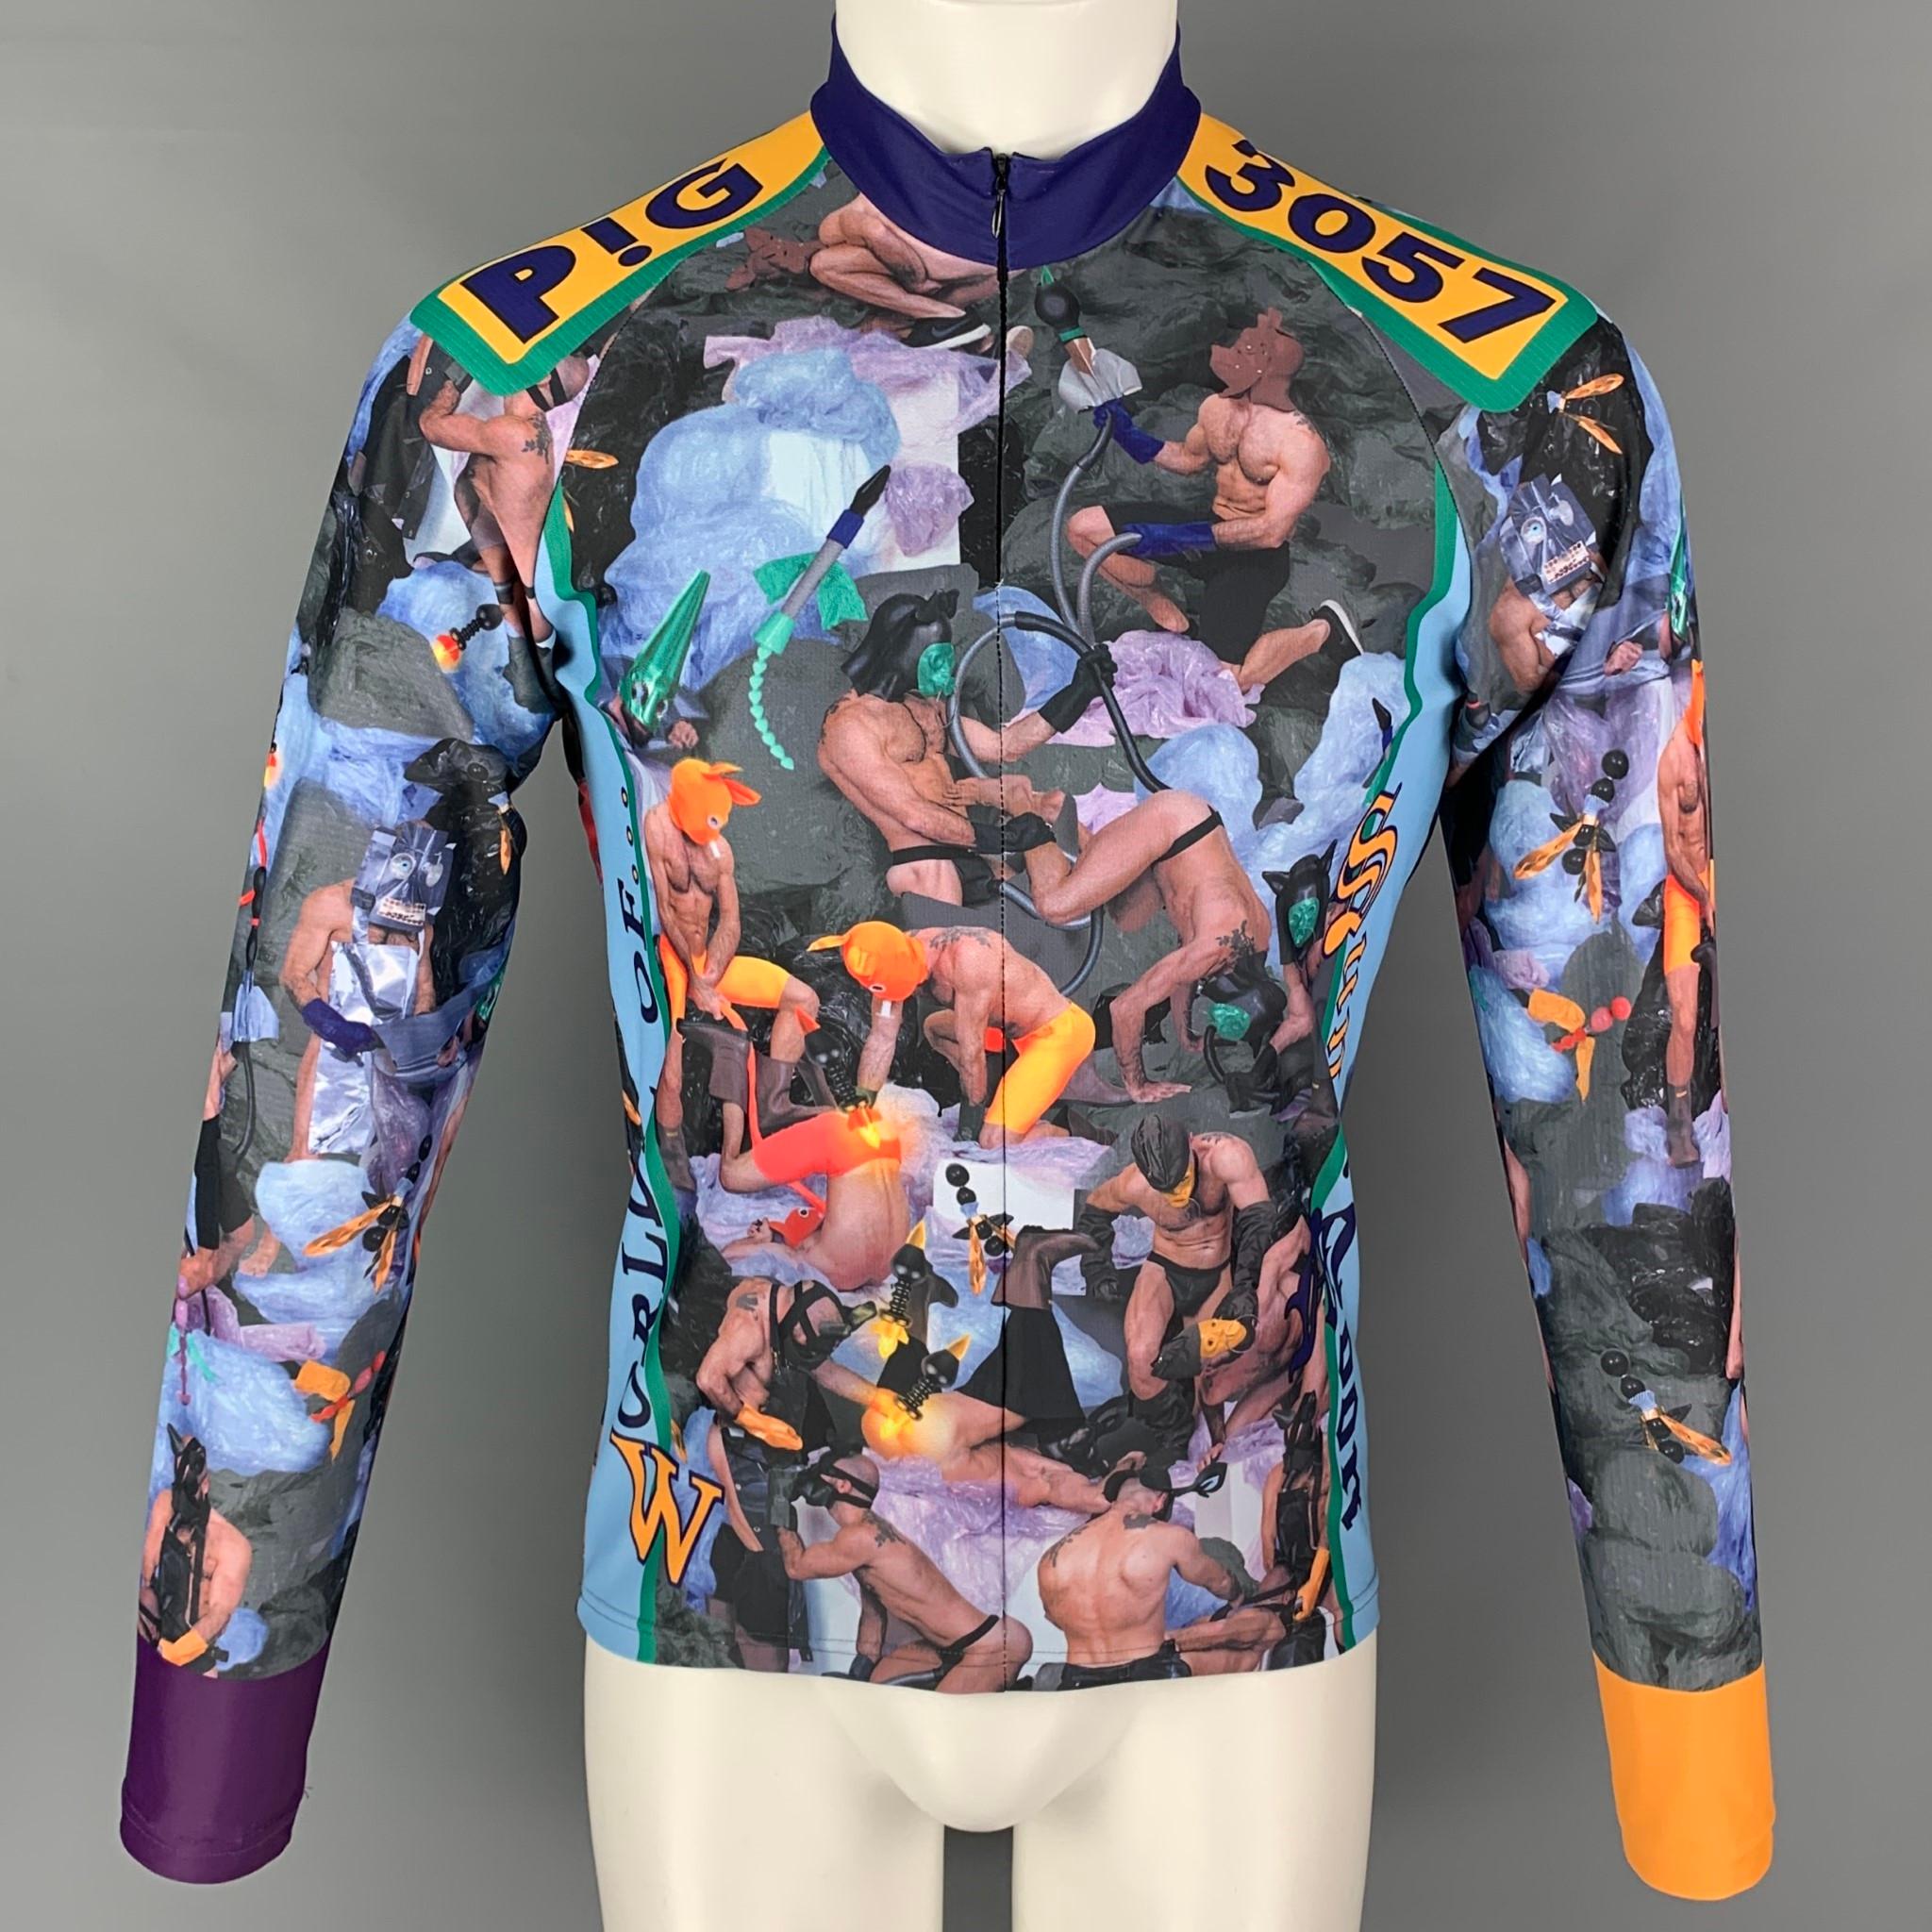 WALTER VAN BEIRENDONCK FW18 Size M Multi-Color Graphic Nylon Jersey Bike Top featuring fetish selfies taken by queer artist Andrea Cammarosano.

Walter Van Beirendonck Cycle Biker Jersey Pullover Top from Fall Winter 2018/2019 WOLRDS OF SUN.